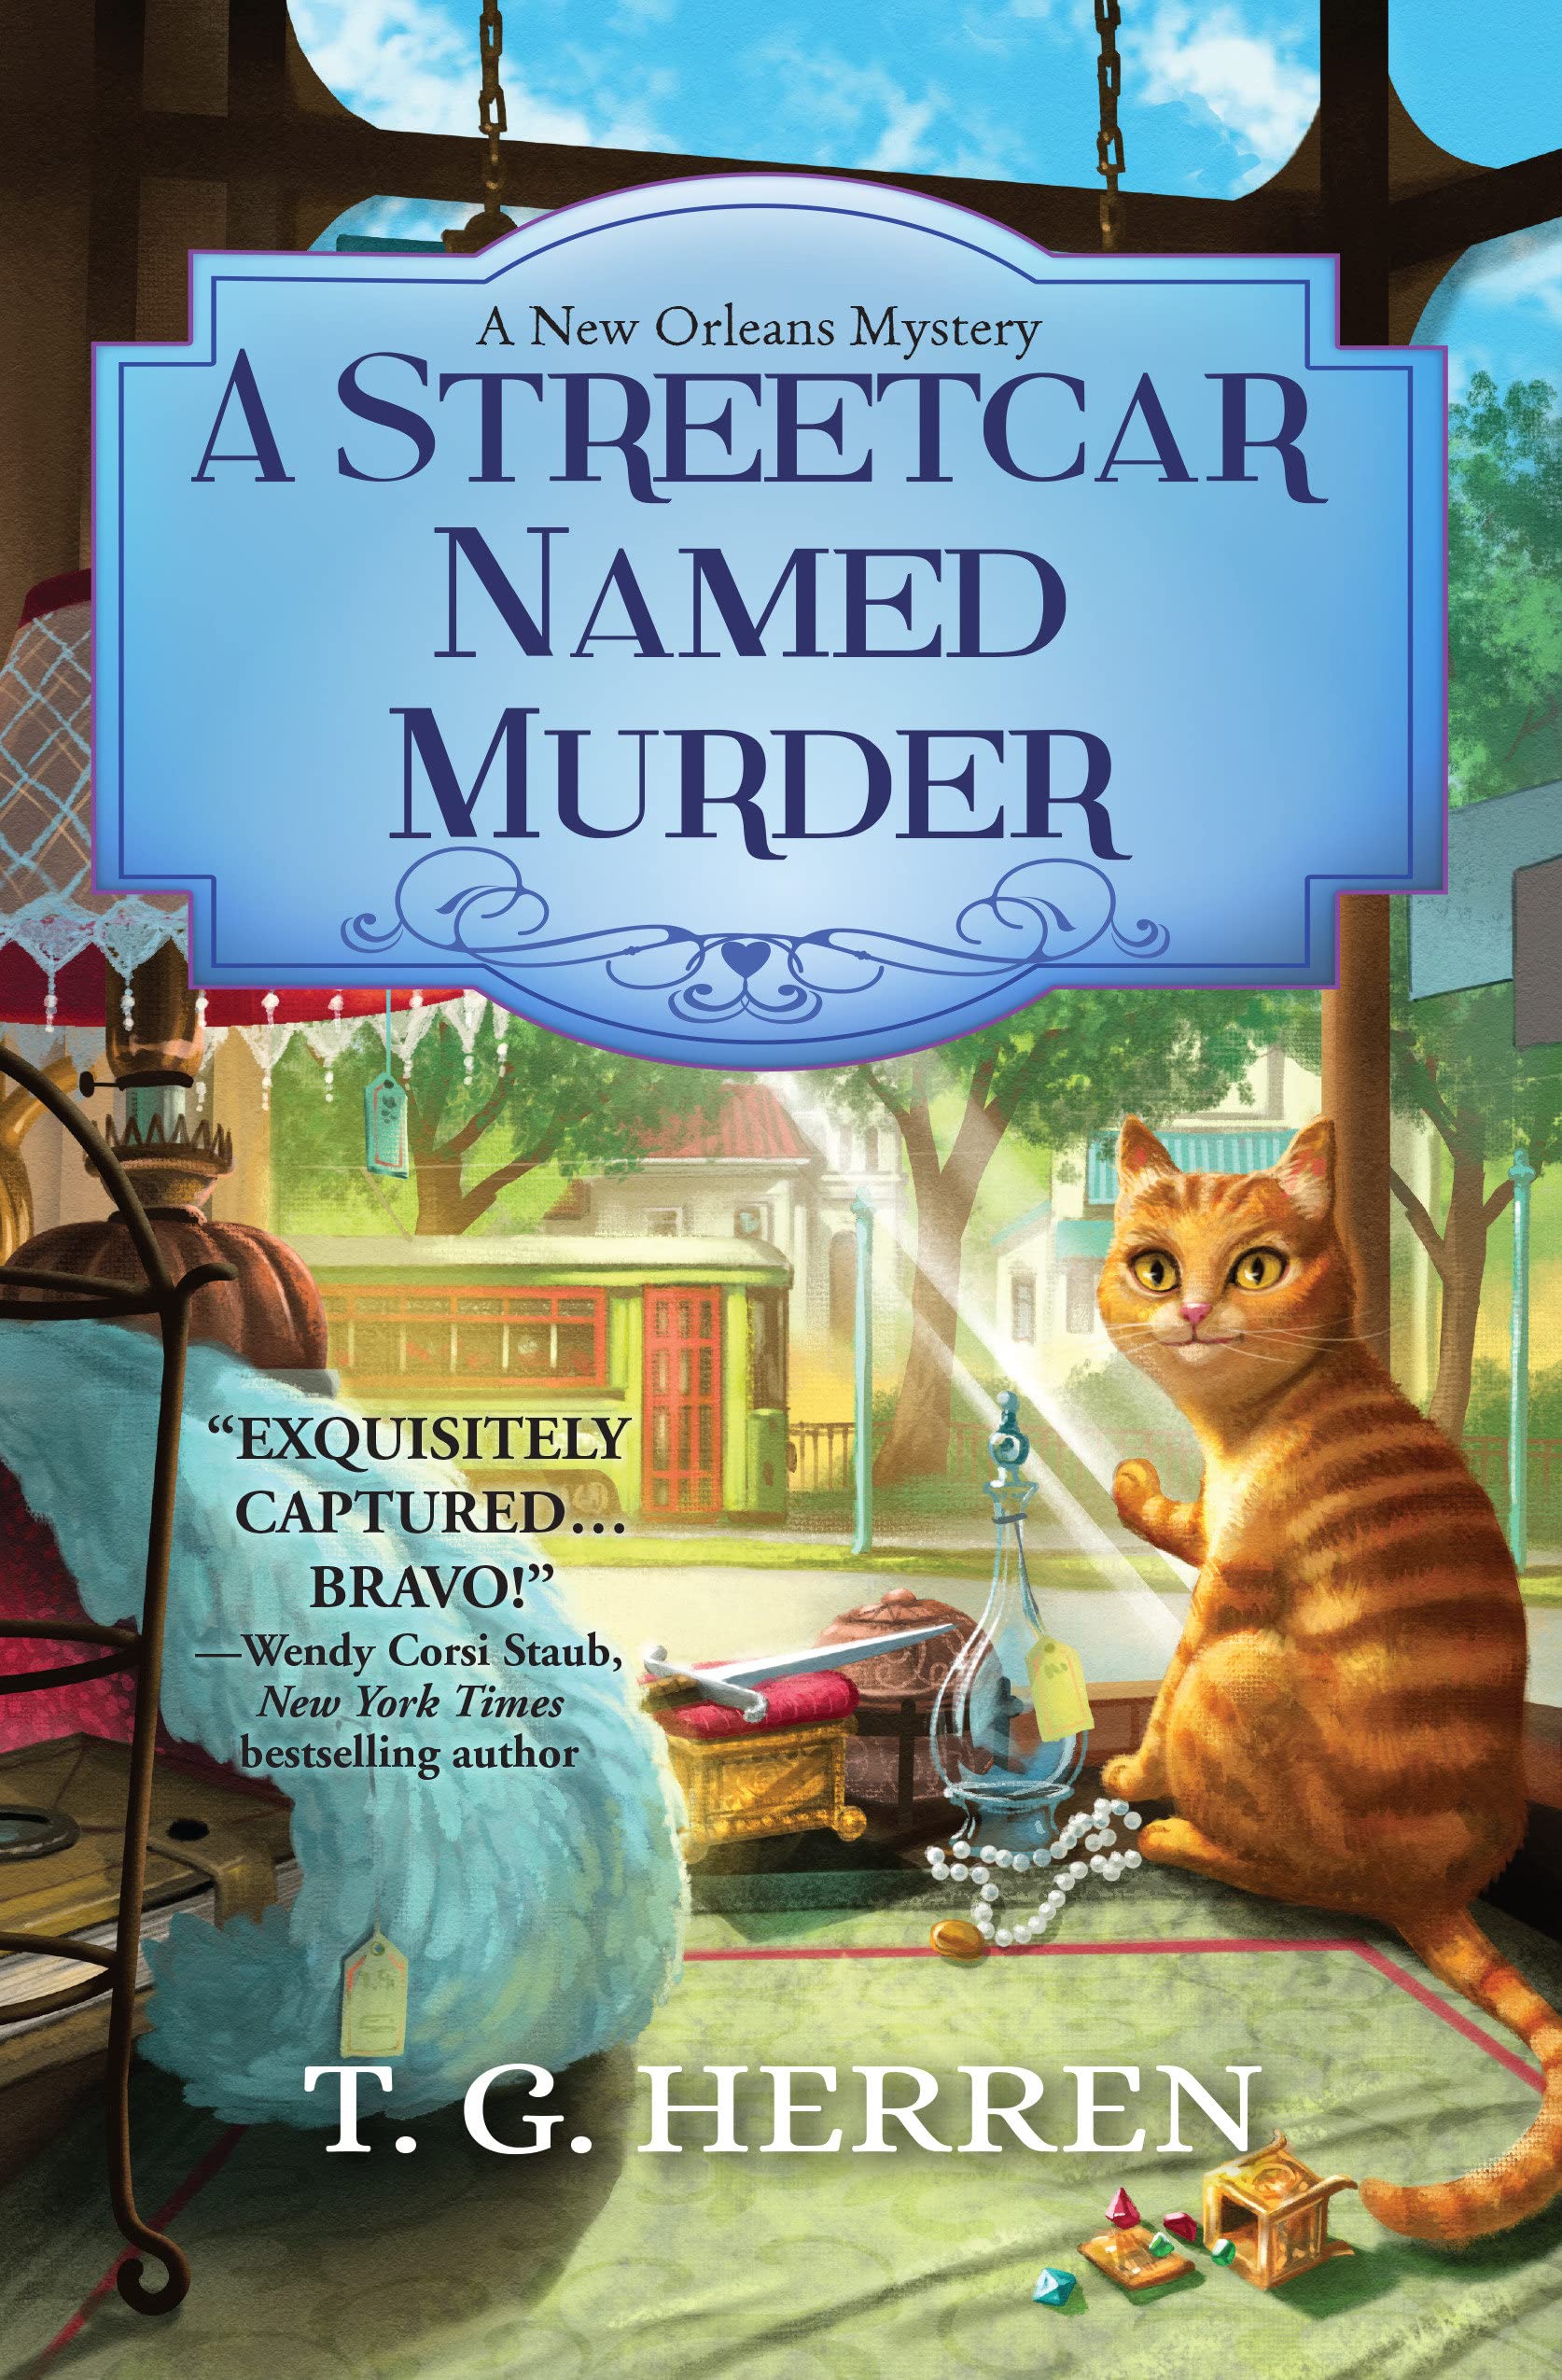 A Streetcar Named Murder (New Orleans Mystery, A)